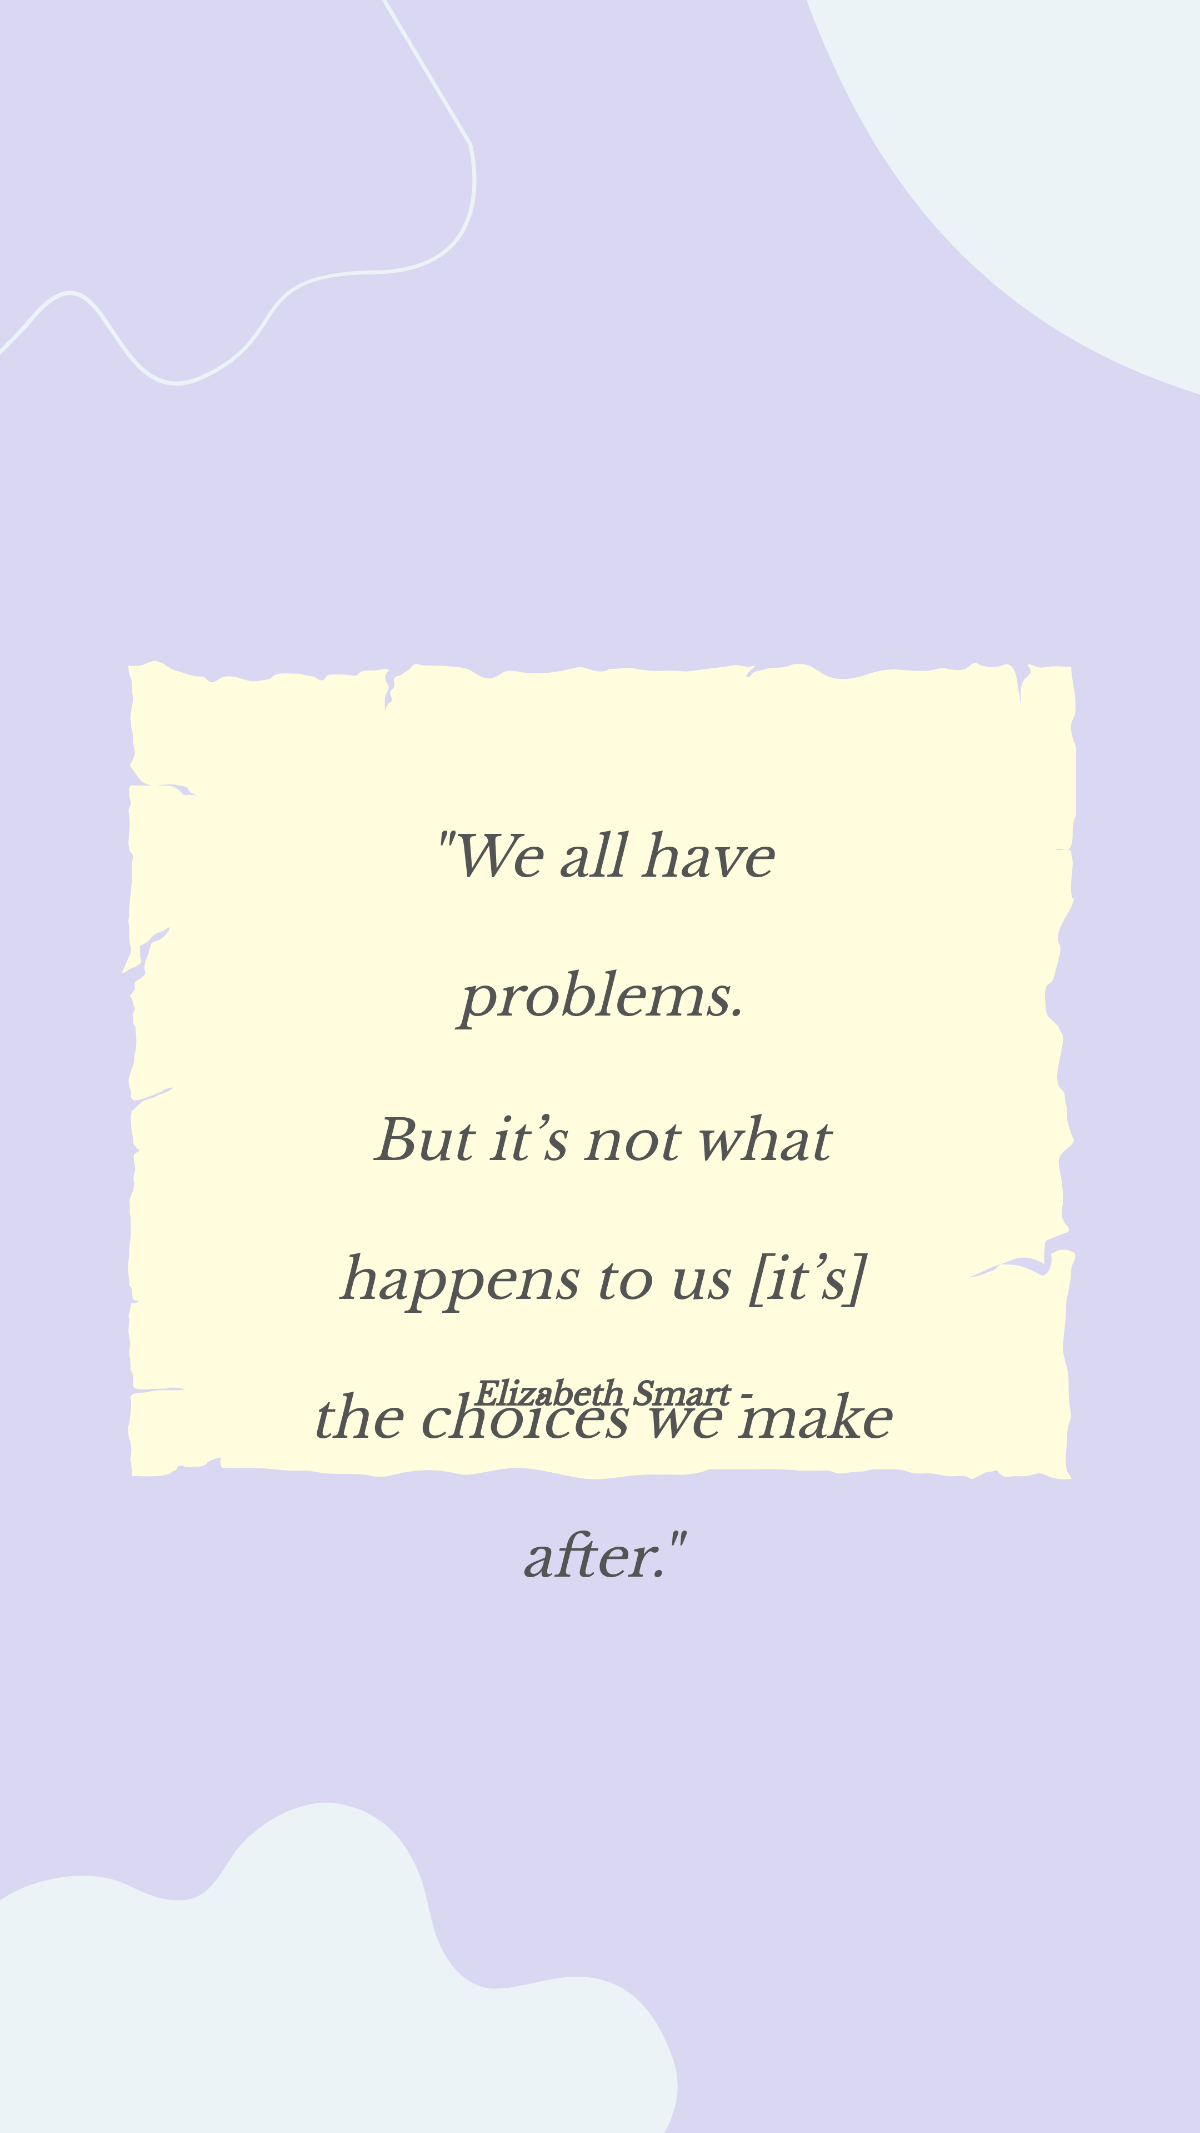 Elizabeth Smart - We all have problems. But it’s not what happens to us [it’s] the choices we make after. Template